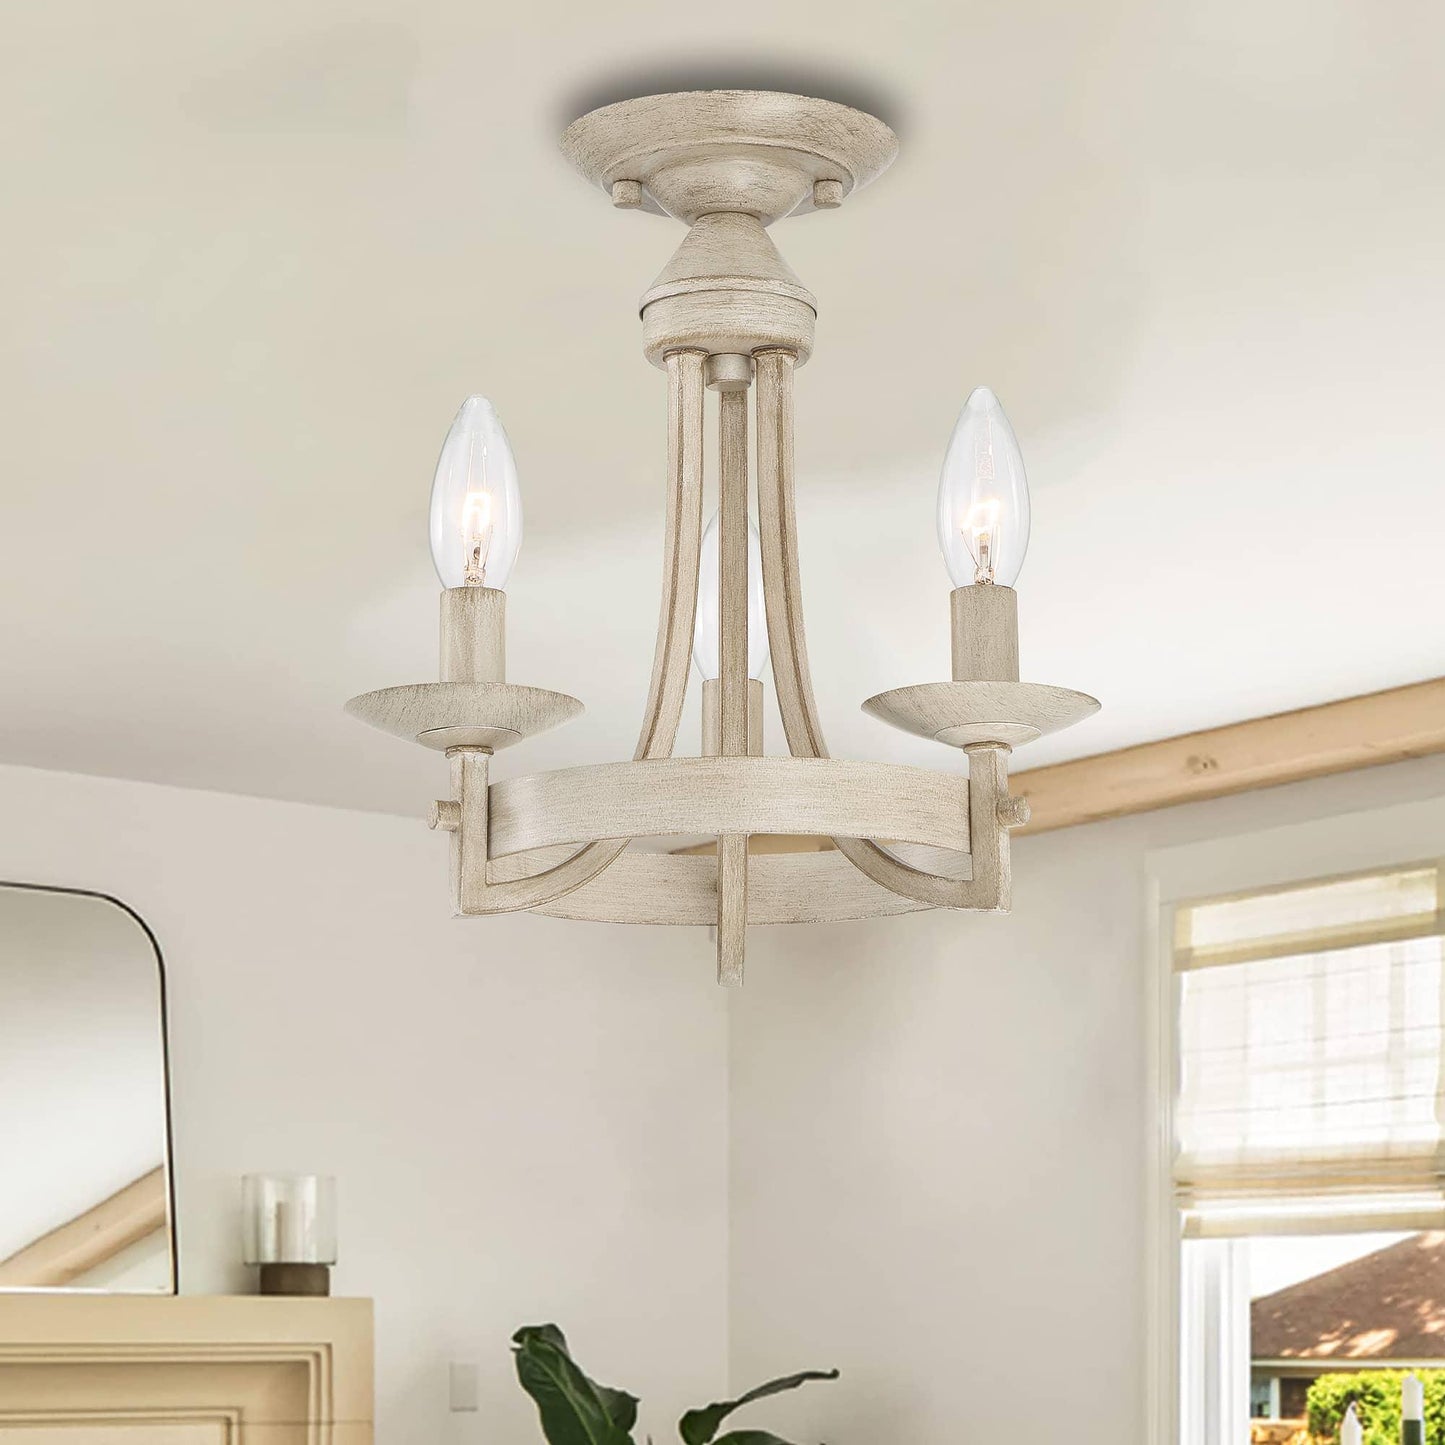 3 light candle semi flush mount (4) by ACROMA